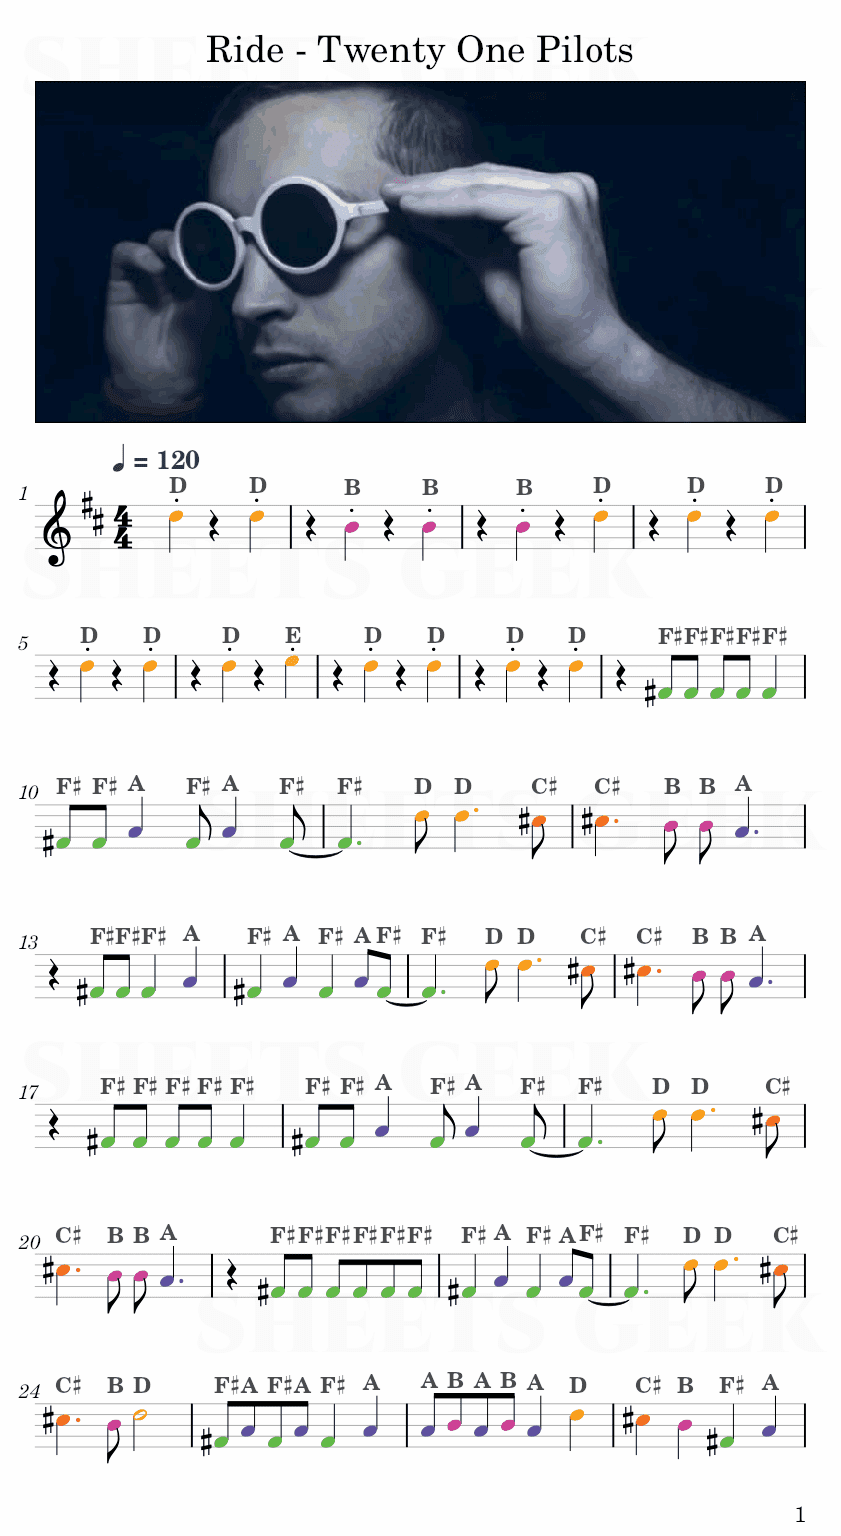 Ride - Twenty One Pilots Easy Sheet Music Free for piano, keyboard, flute, violin, sax, cello page 1